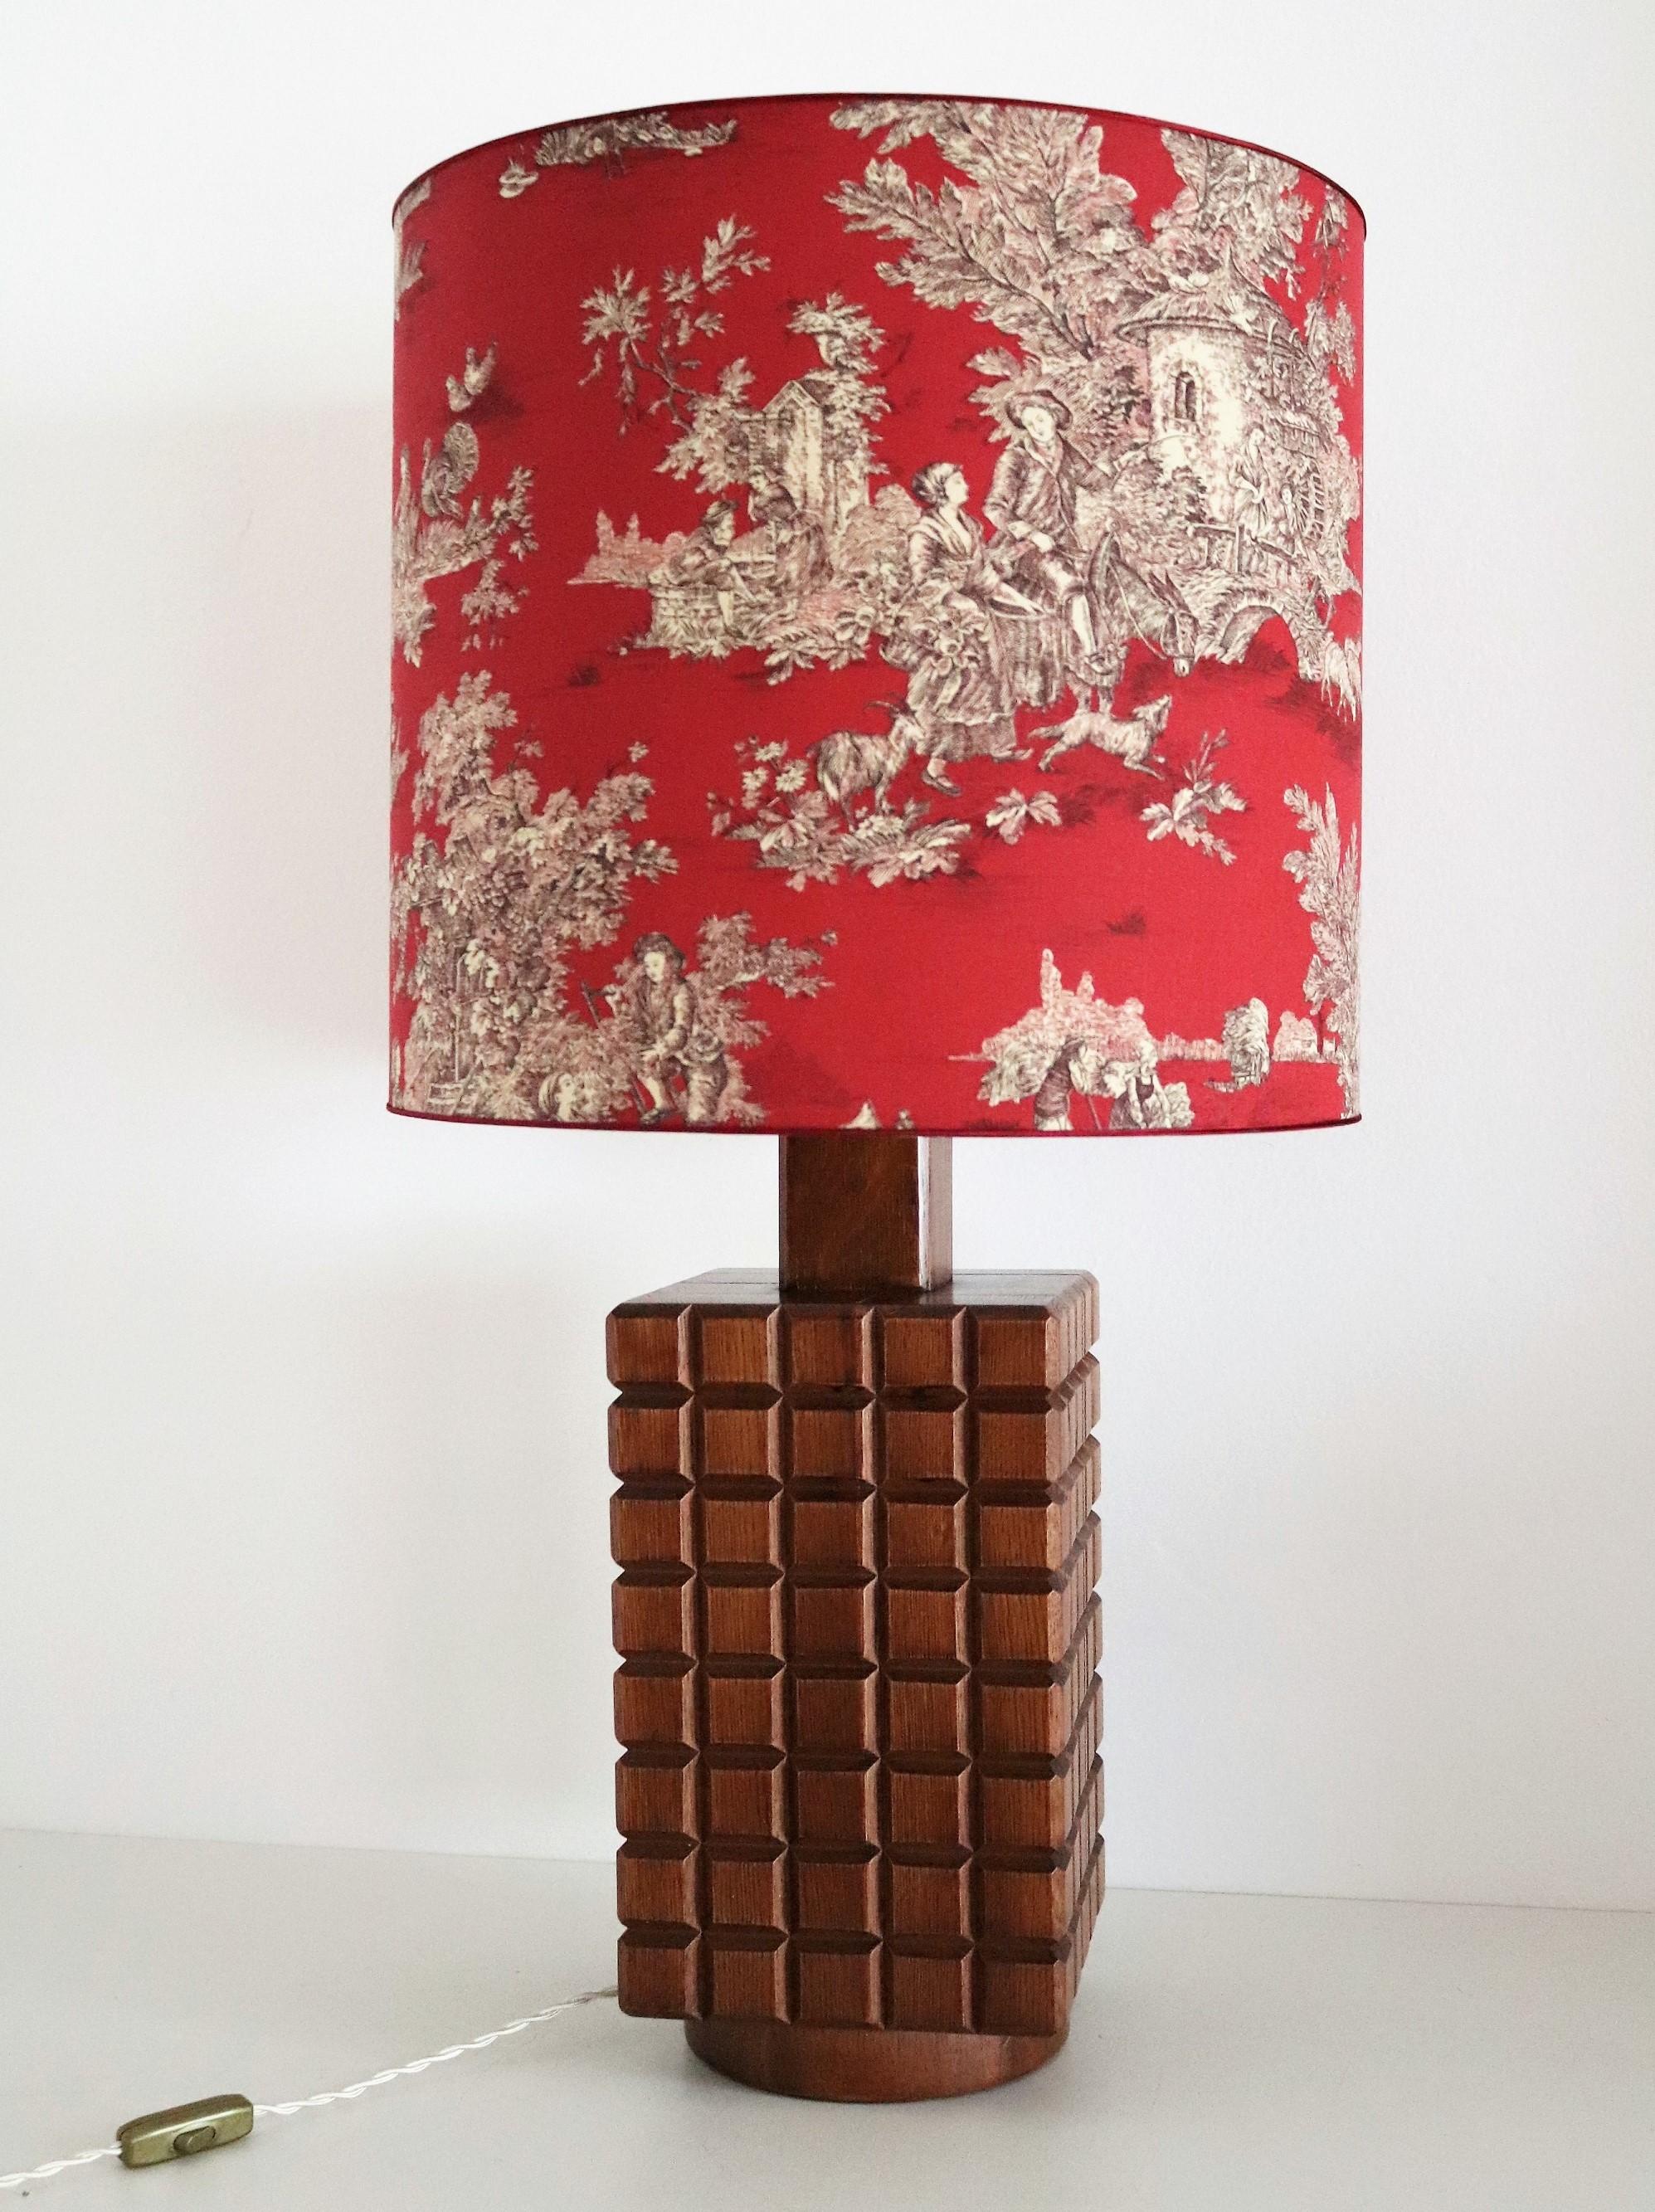 Italian Midcentury Brutalistic Lamp in Chestnut Wood in Frigerio Style, 1960s 14